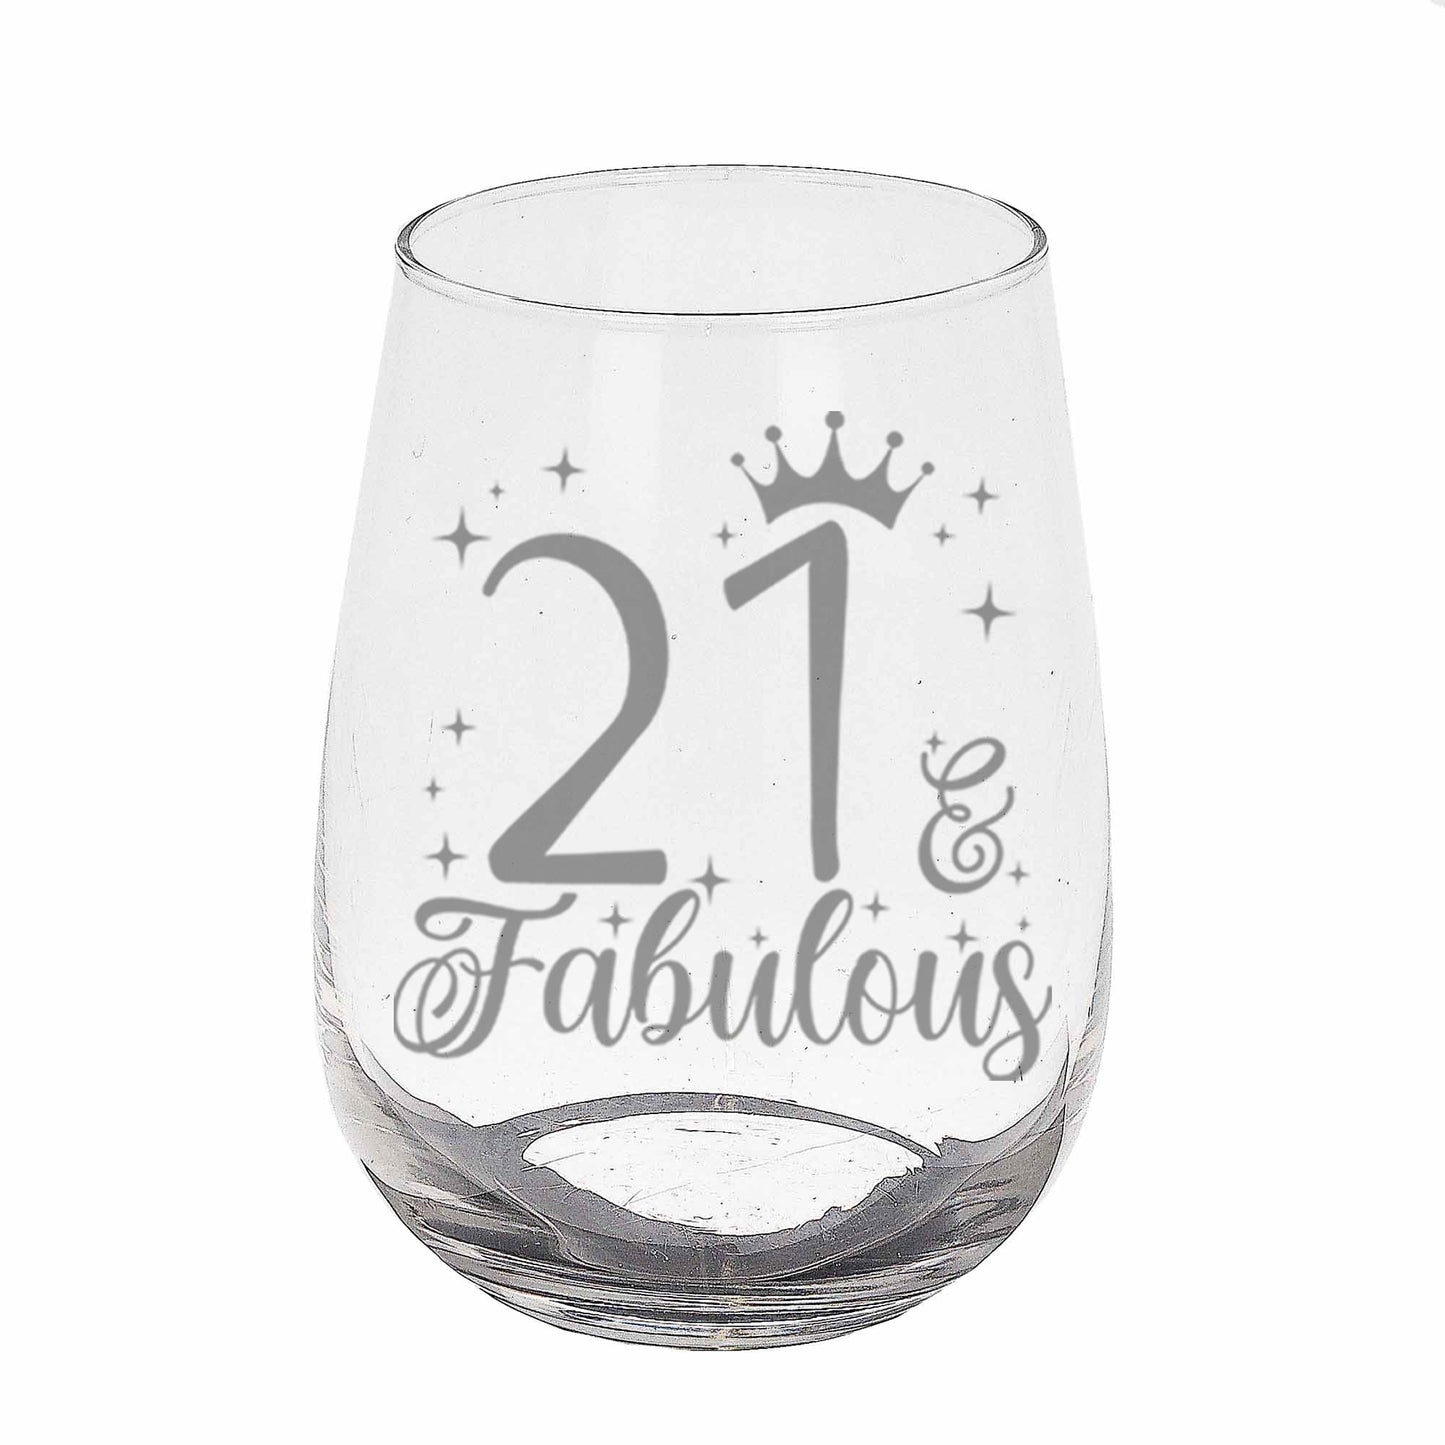 21 & Fabulous Engraved Stemless Gin Glass and/or Coaster Set  - Always Looking Good - Stemless Gin Glass On Its Own  